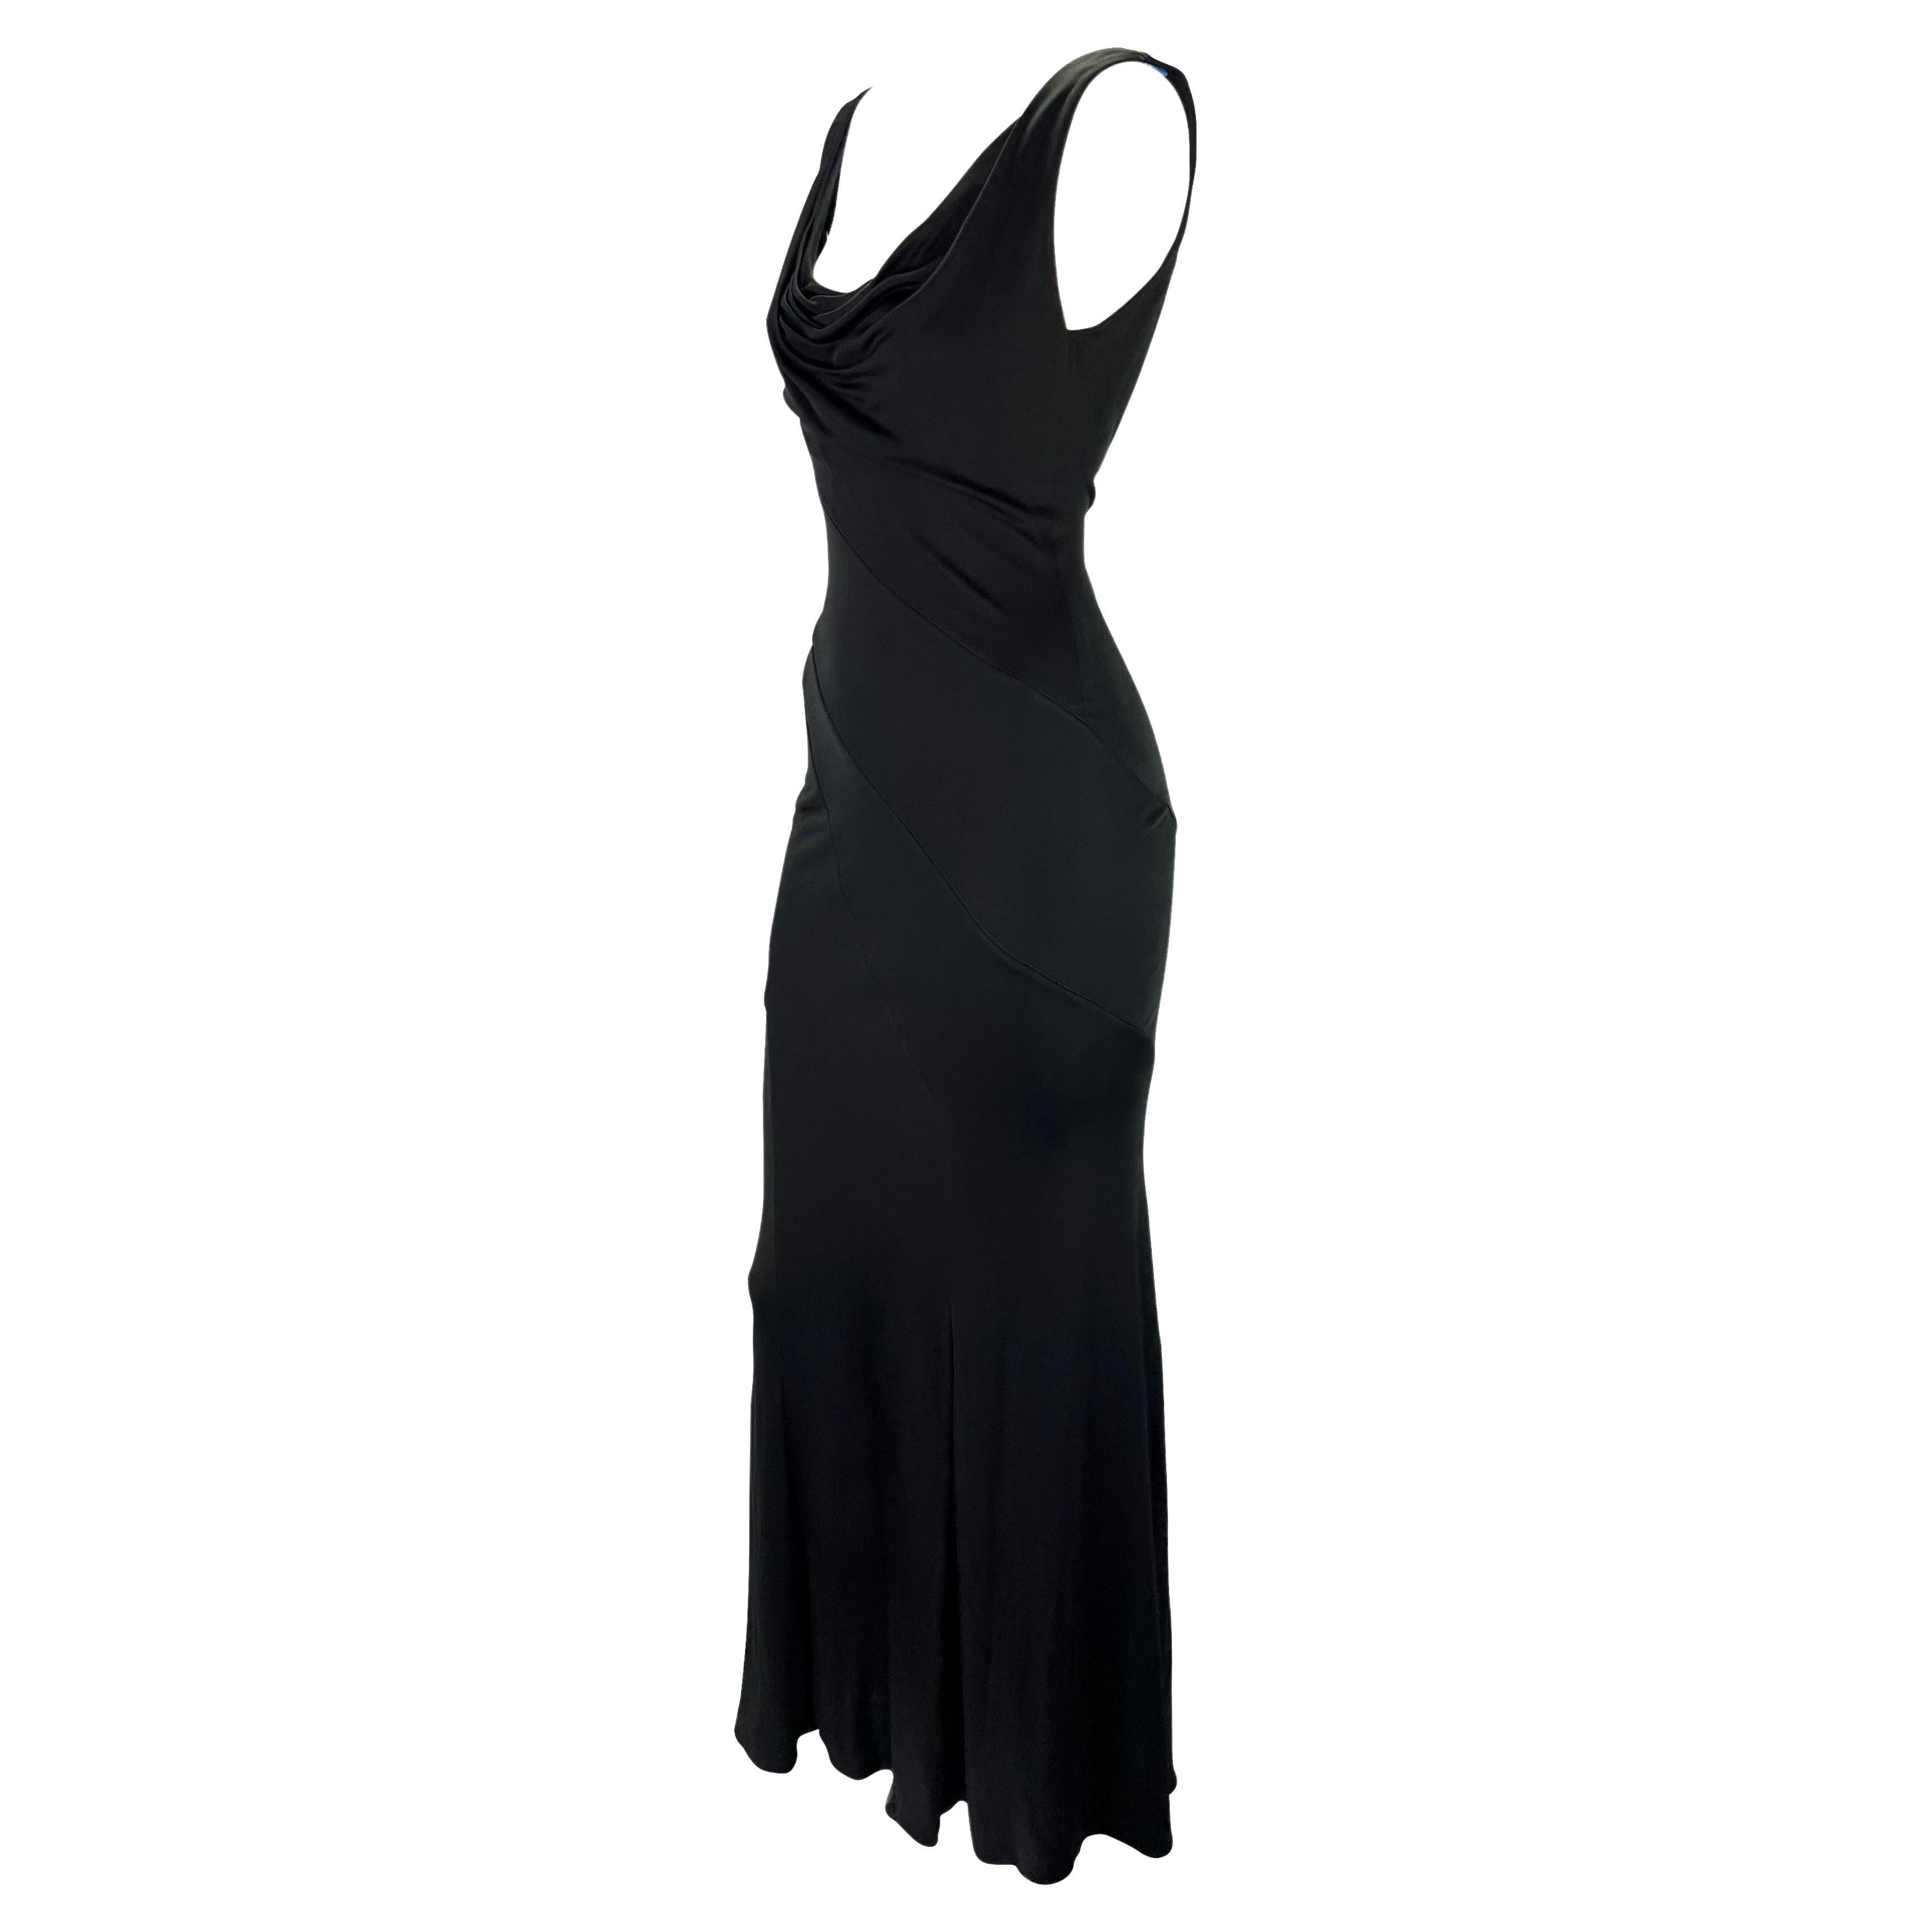 Presenting a beautiful black Gianni Versace Couture gown, designed by Donatella Versace. From the early 2000s, this effortlessly chic and sexy gown features a cowl neckline and an exposed back. The form-fitting dress is made complete with panels